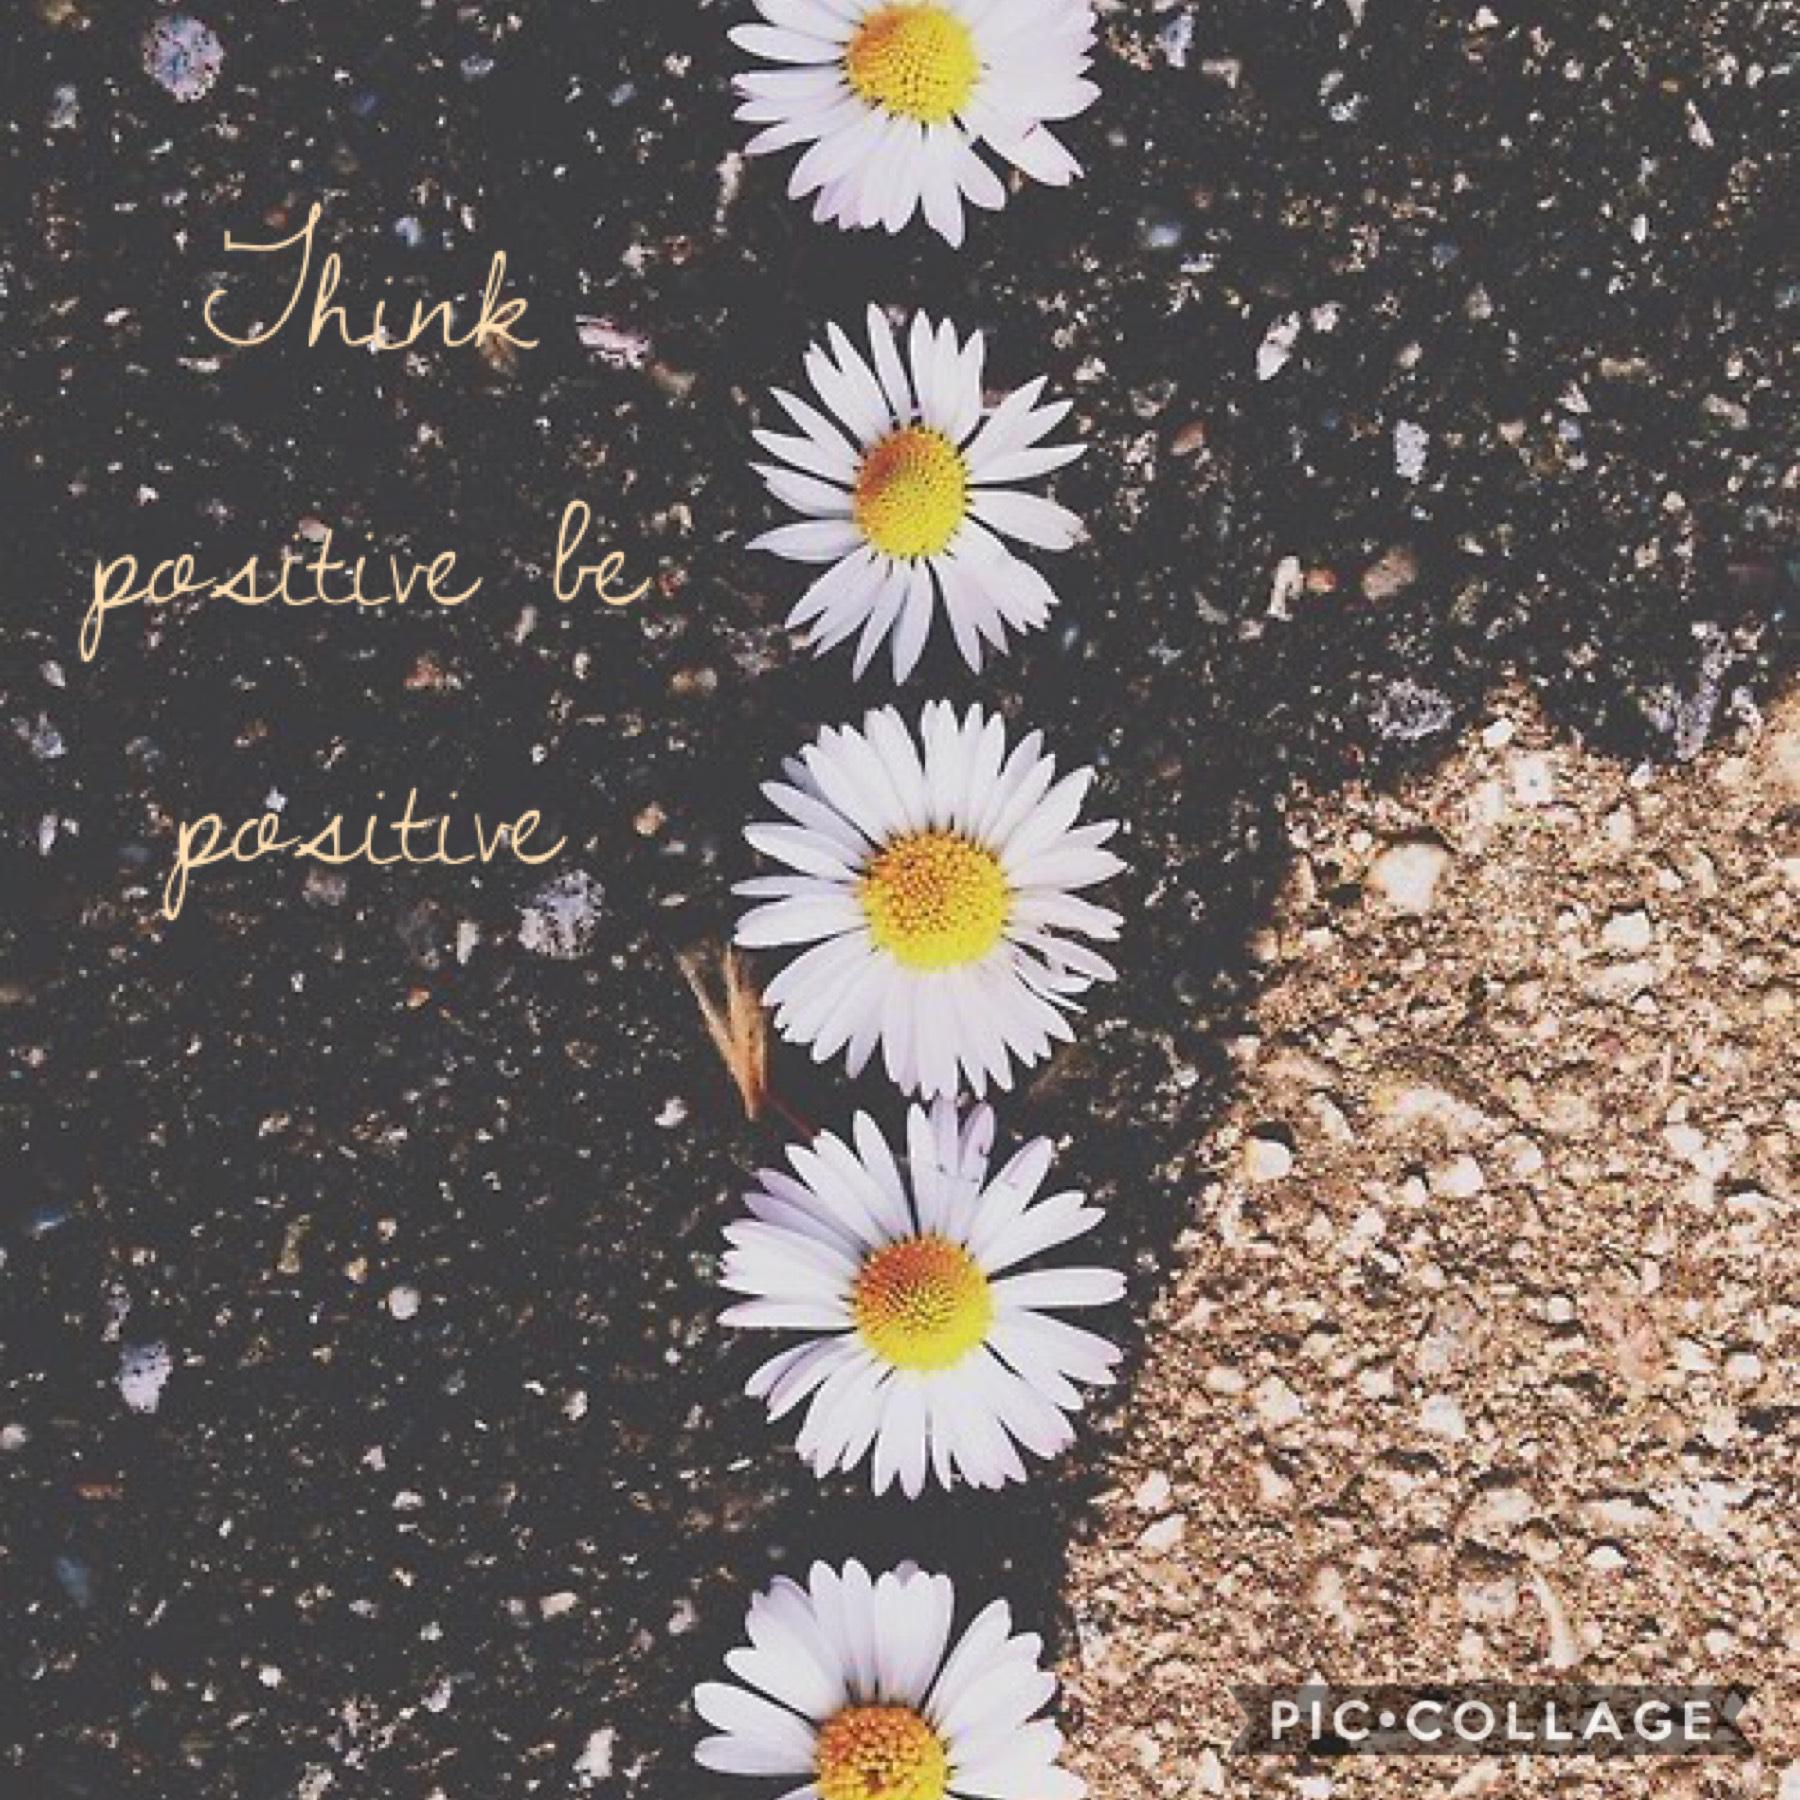 Think positive be positive 